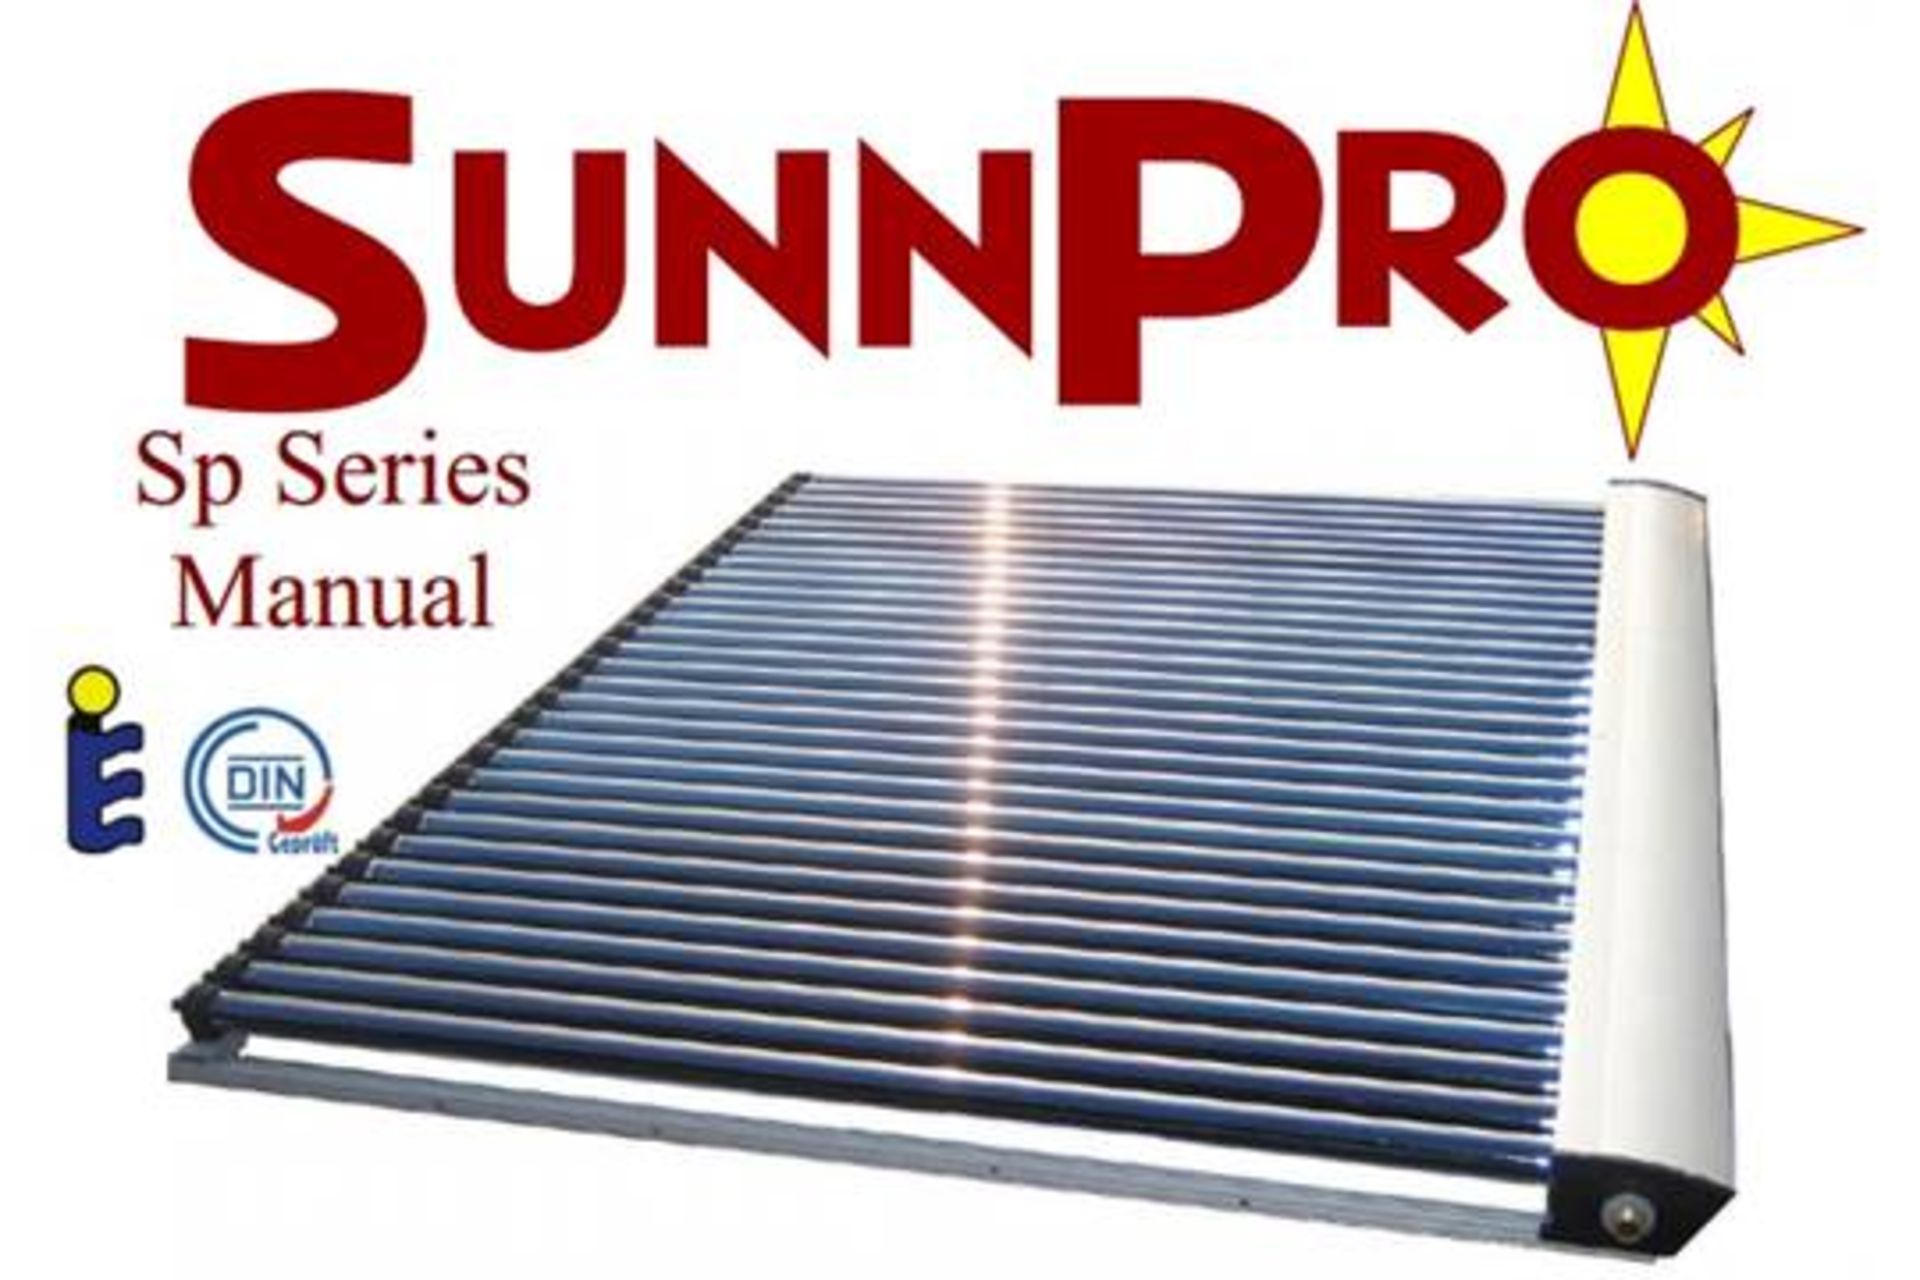 1 x Sunnpro SP30 Vacuum Tube Solar Panel - Size 2420 x 2010mm - Amongst The Most Efficient Solar - Image 2 of 7